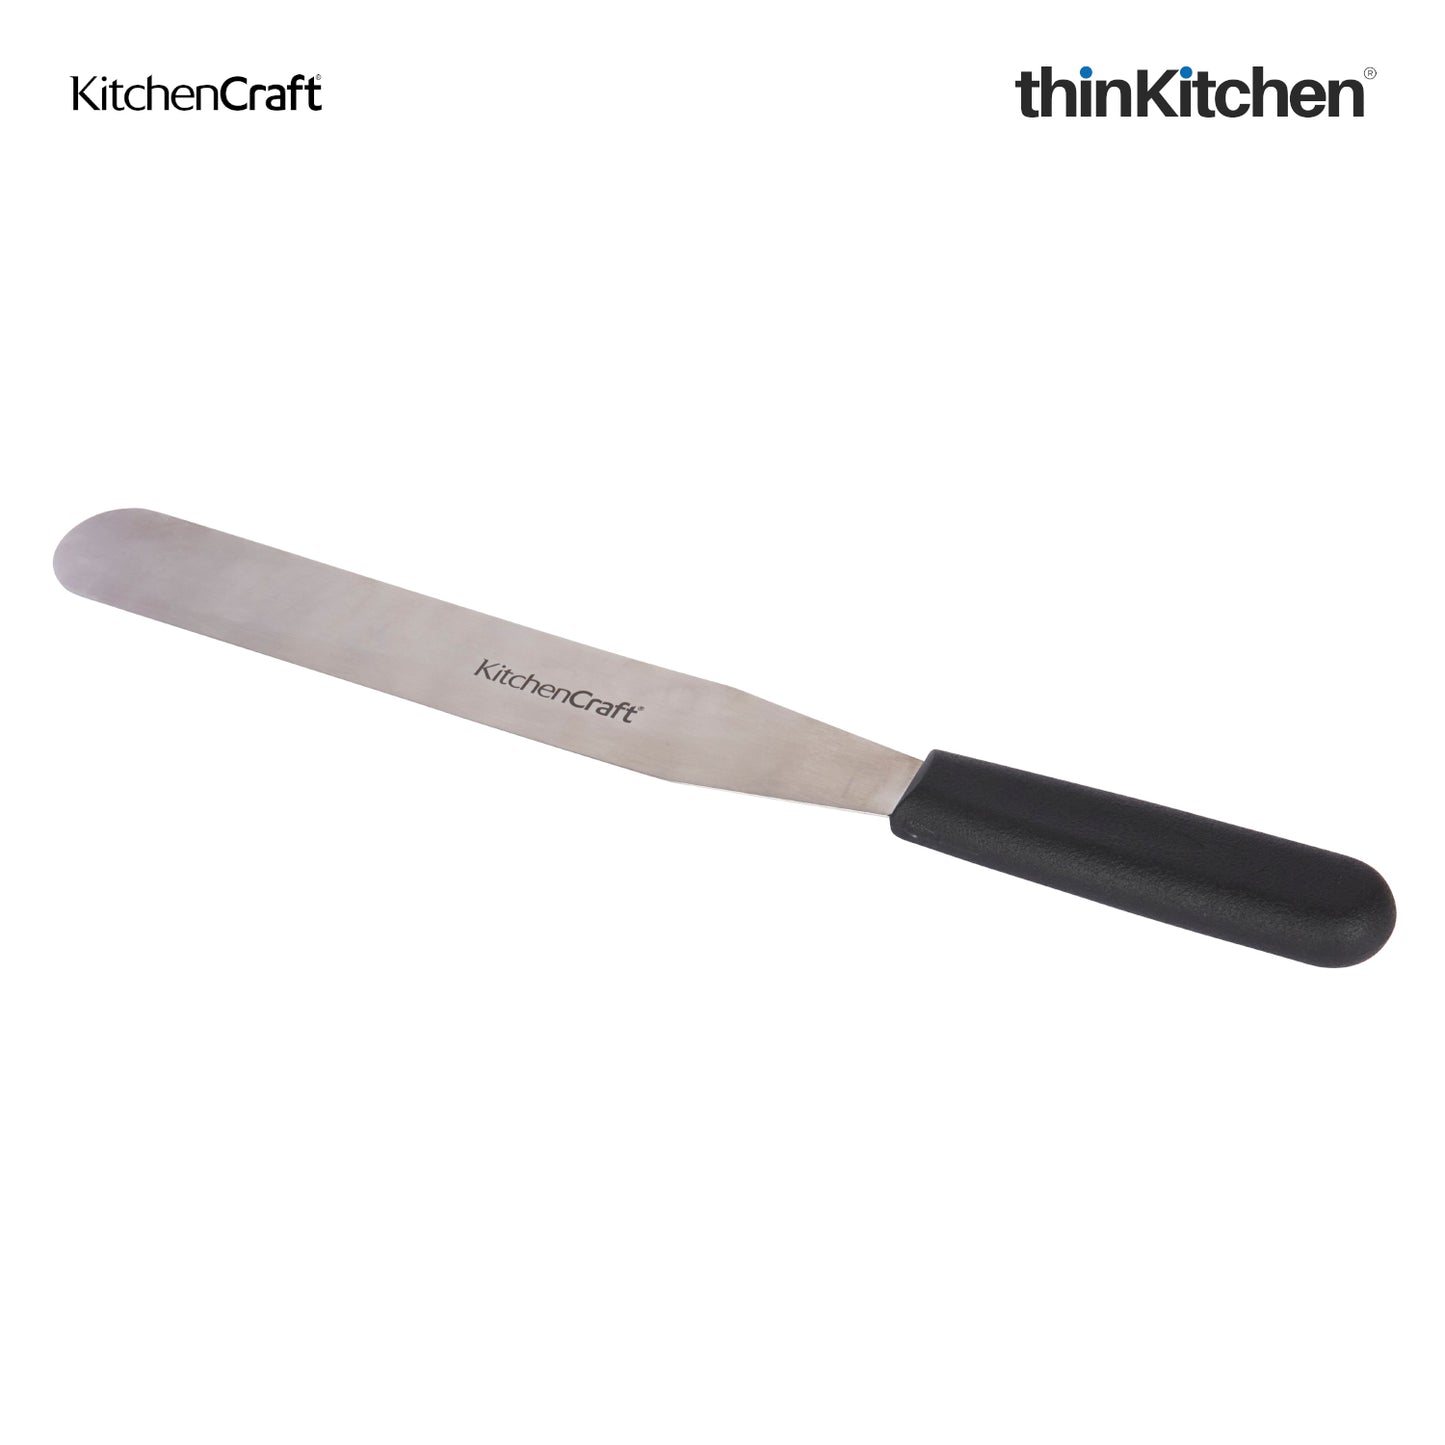 Kitchencraft Sweetly Does It Tempered Stainless Steel Large Palette Knife 38cm